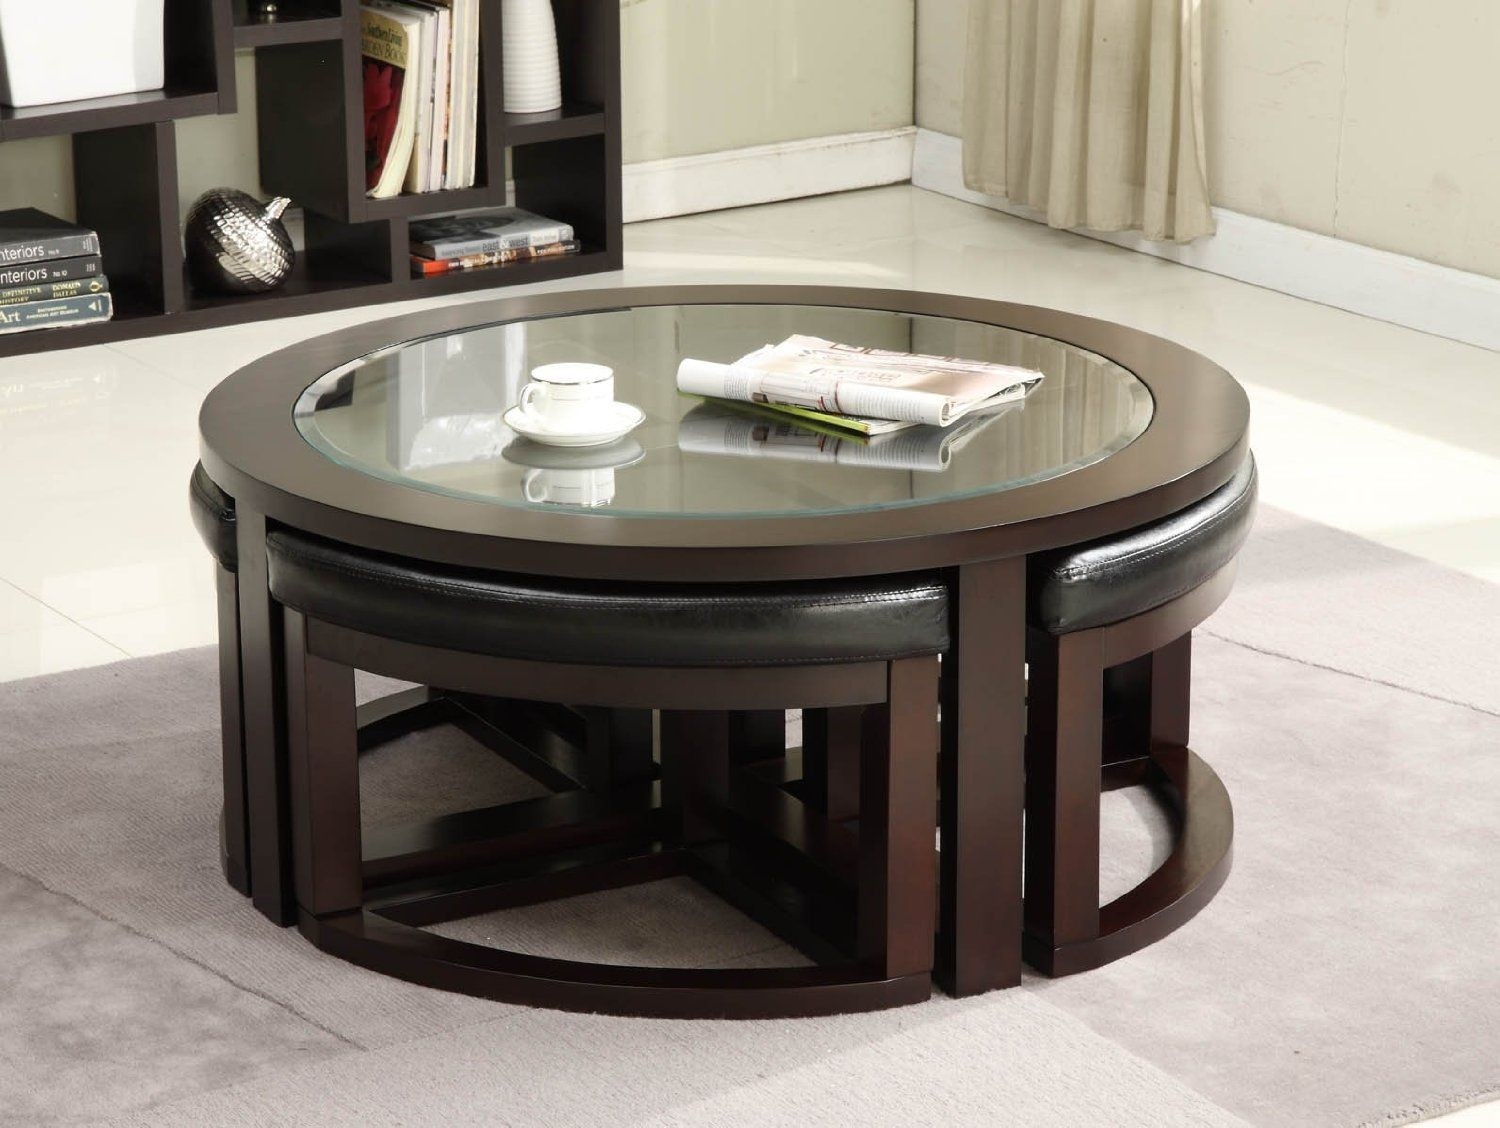 Round coffee table with stools 16